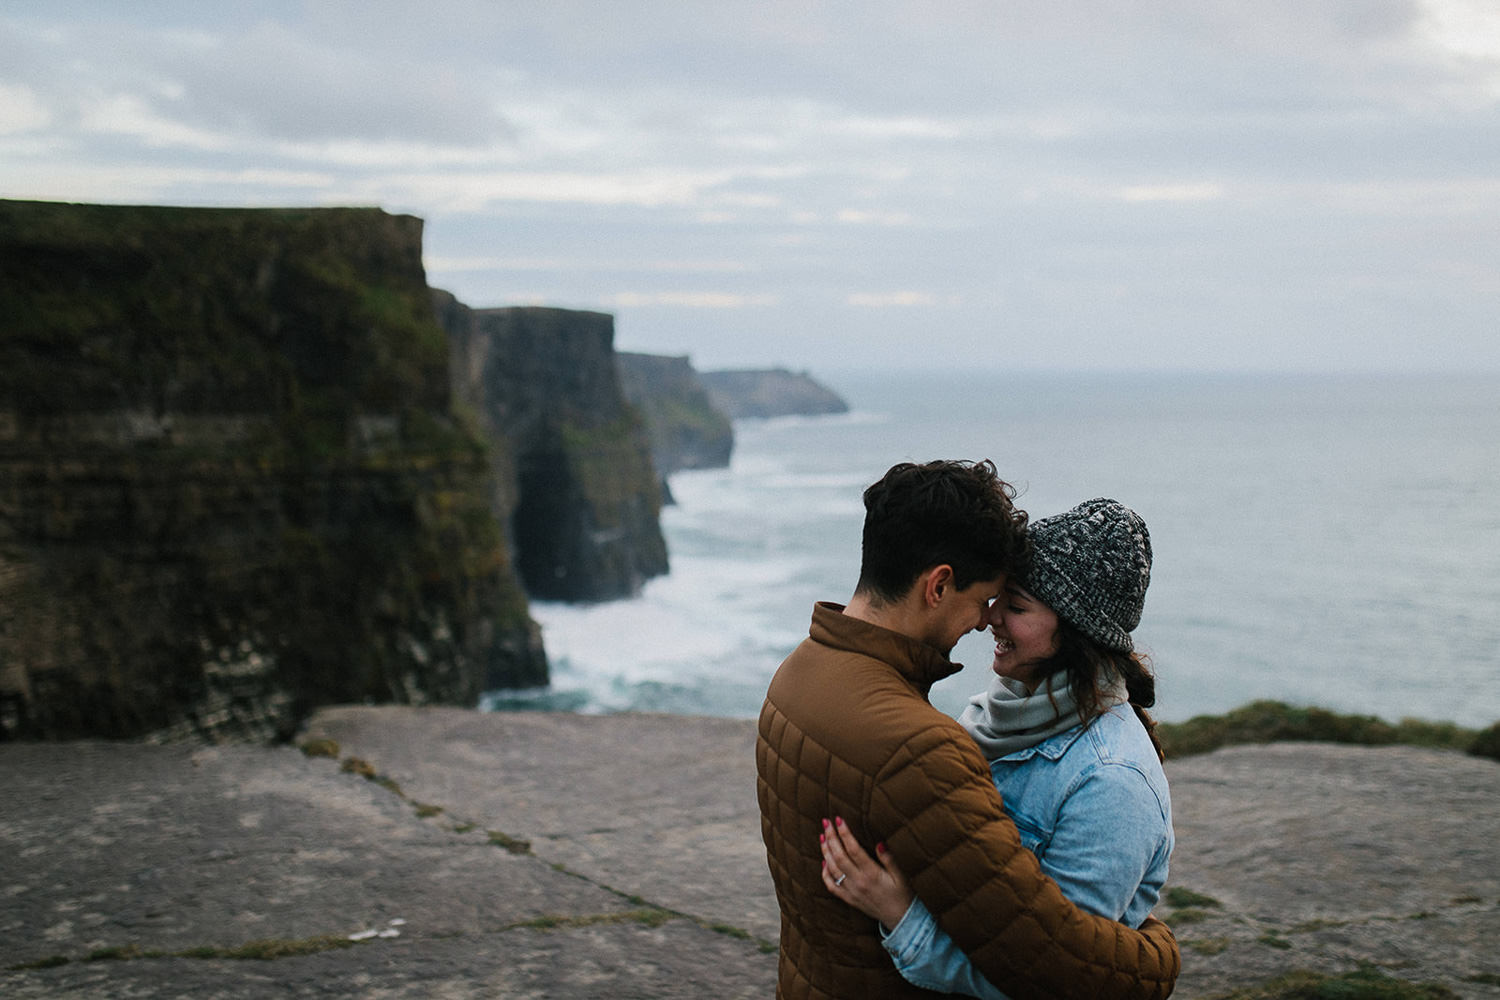 Cliffs-of-moher-proposal-ME-1 Cliffs of Moher Proposal  // Michael & Emmaly